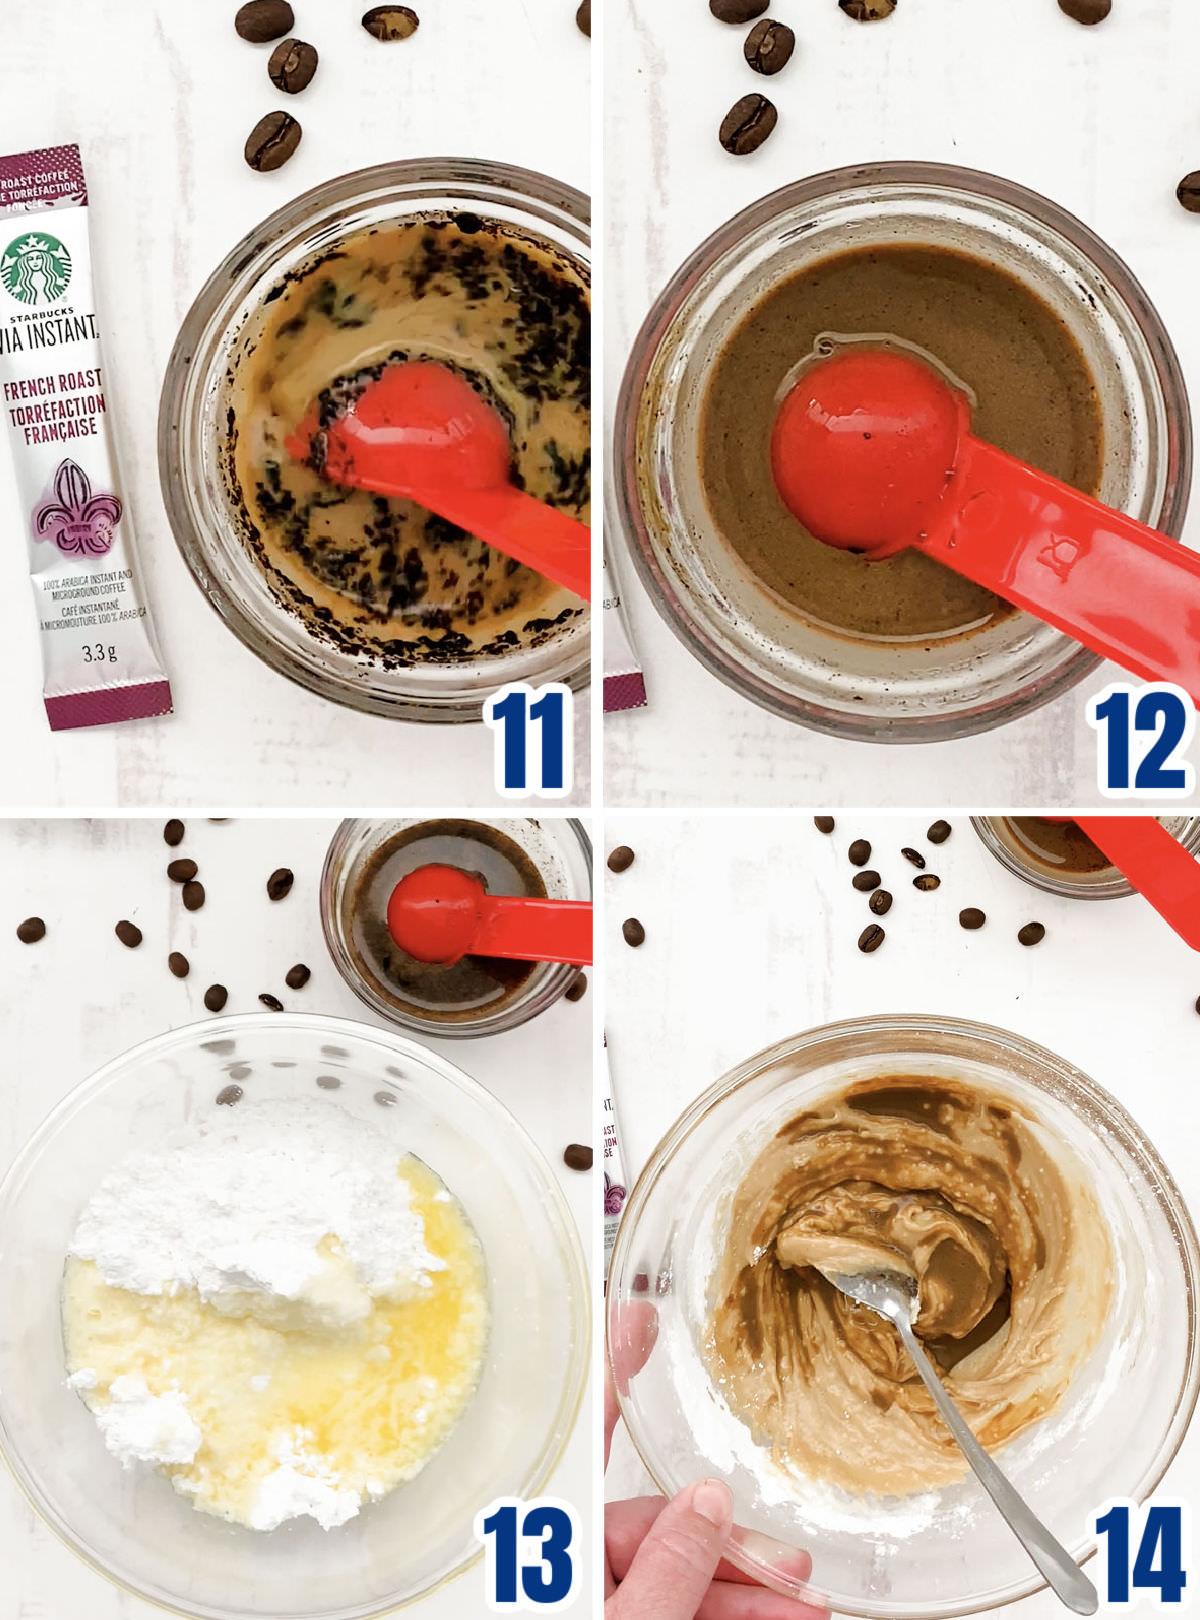 Collage image showing how to make the Homemade Coffee Icing.